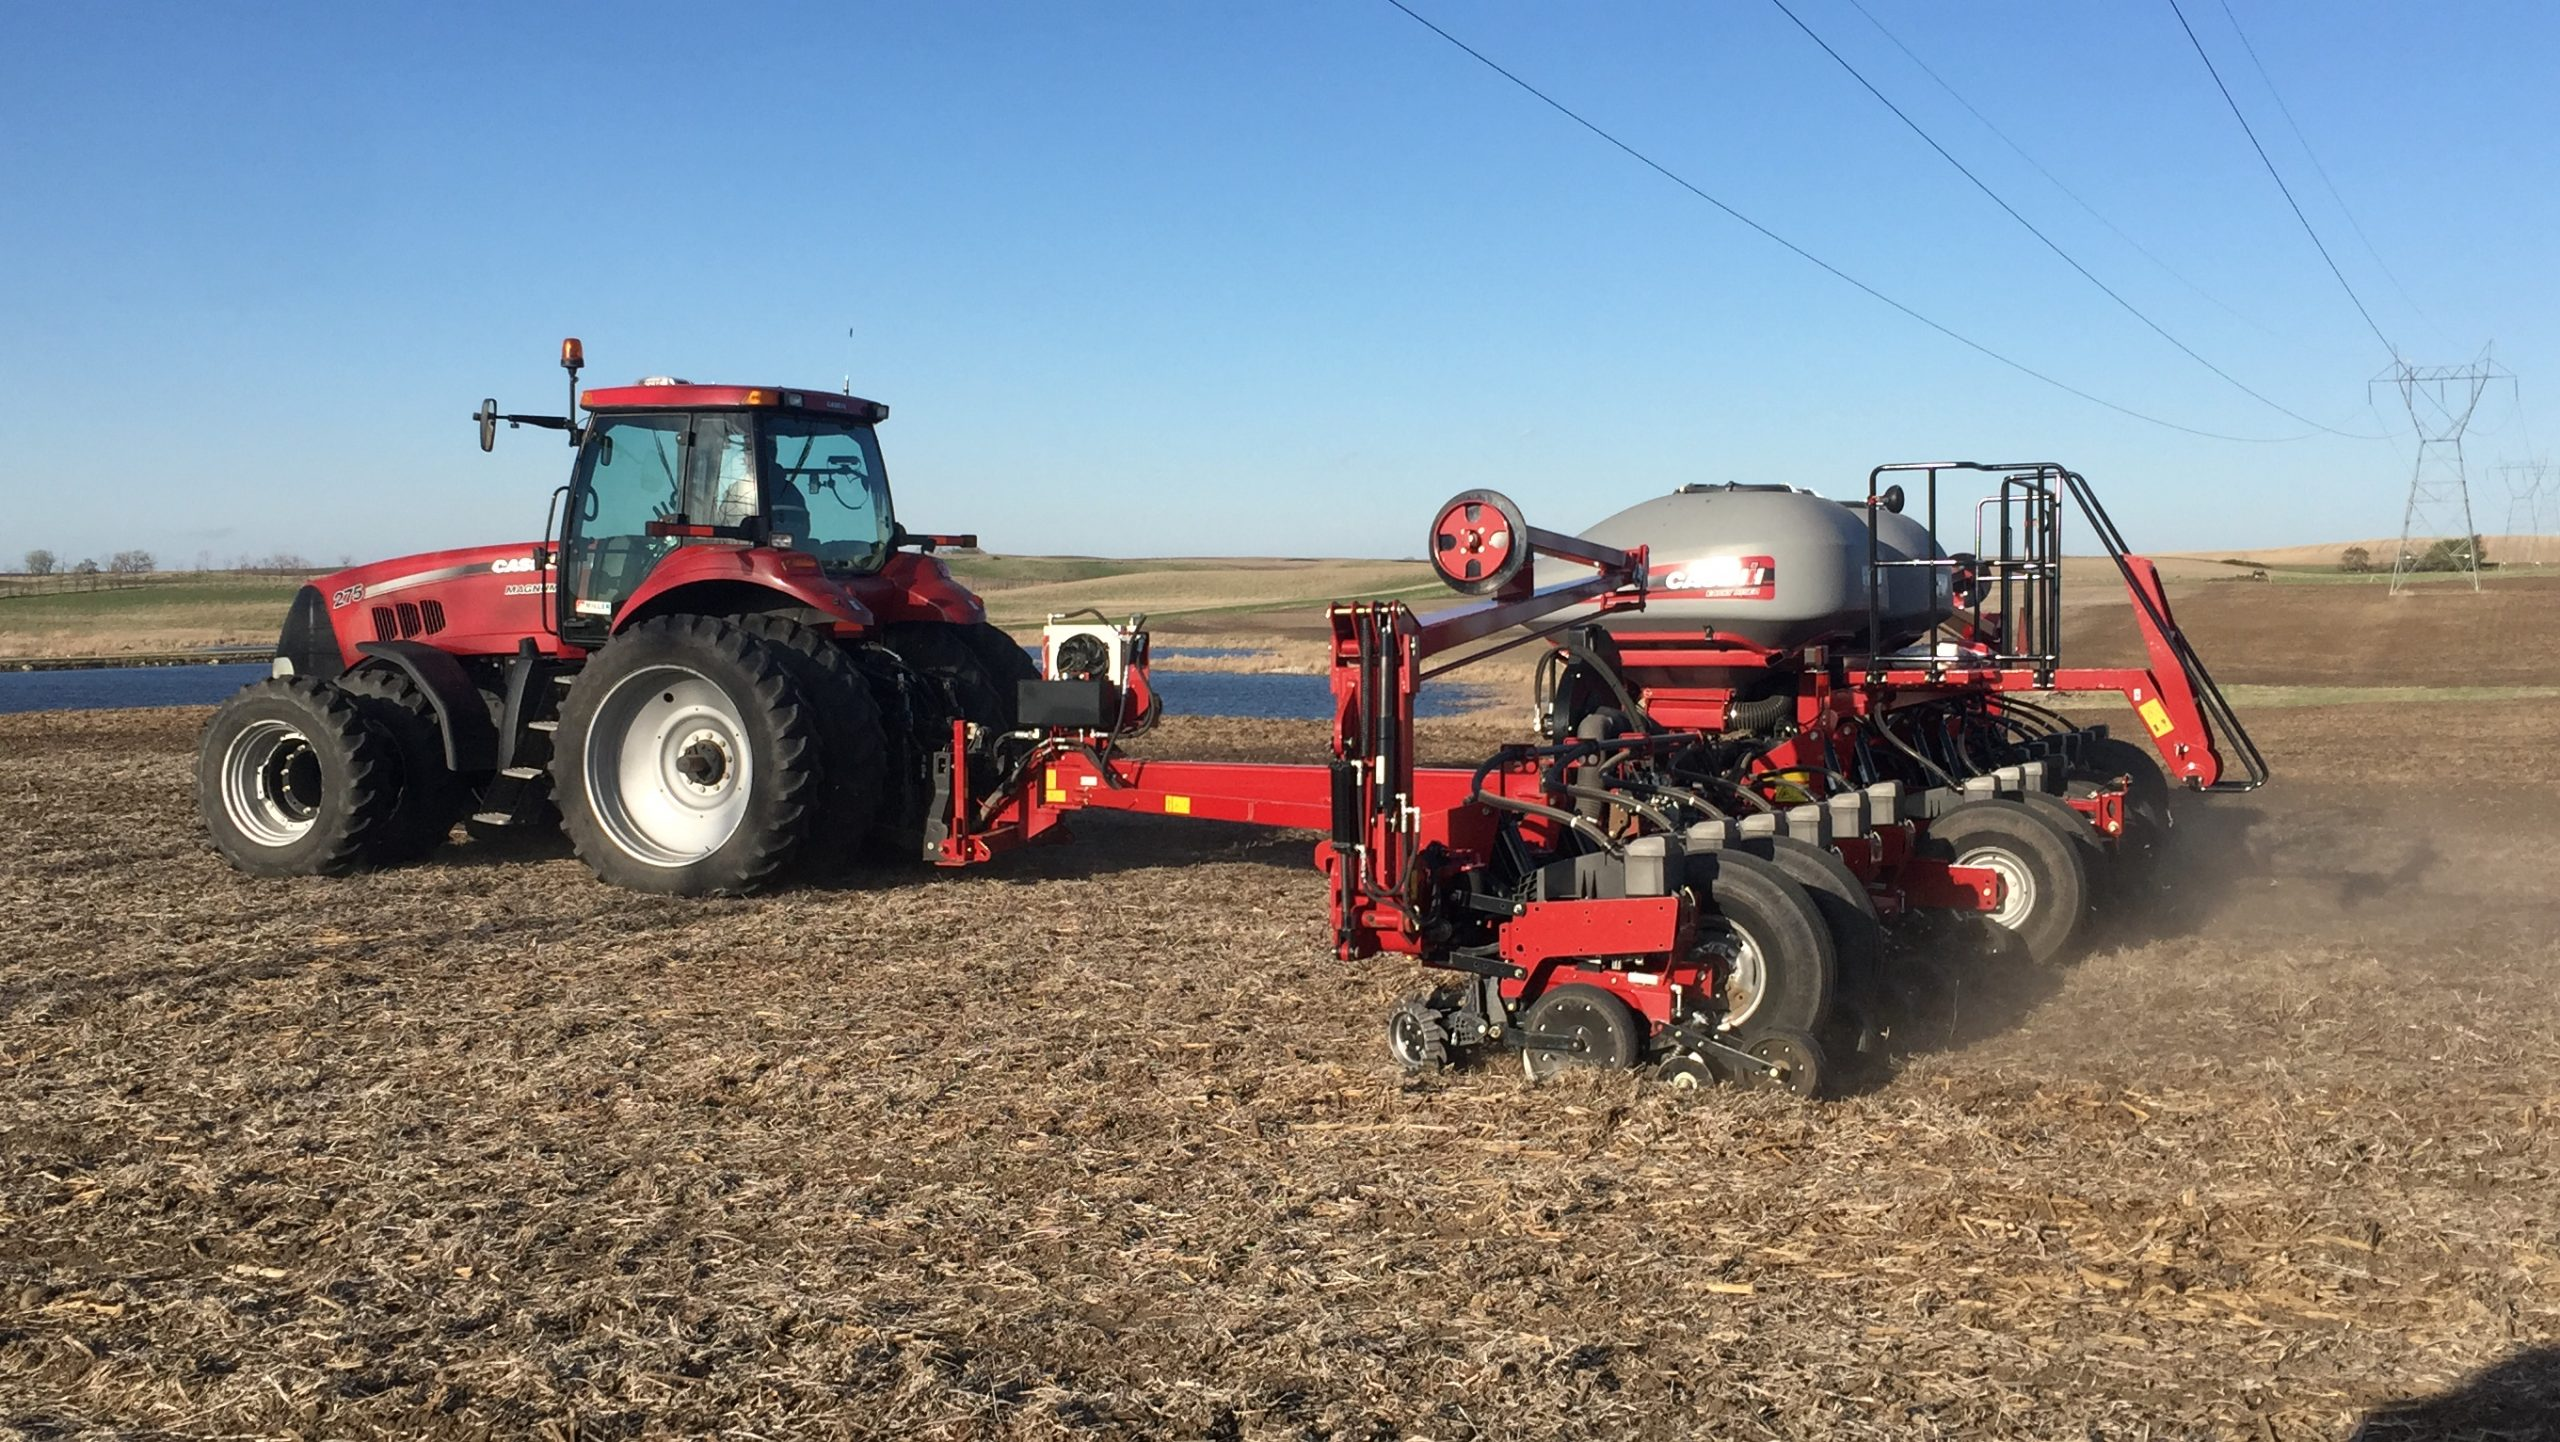 Corn growers in the central Red River Valley are eager to plant